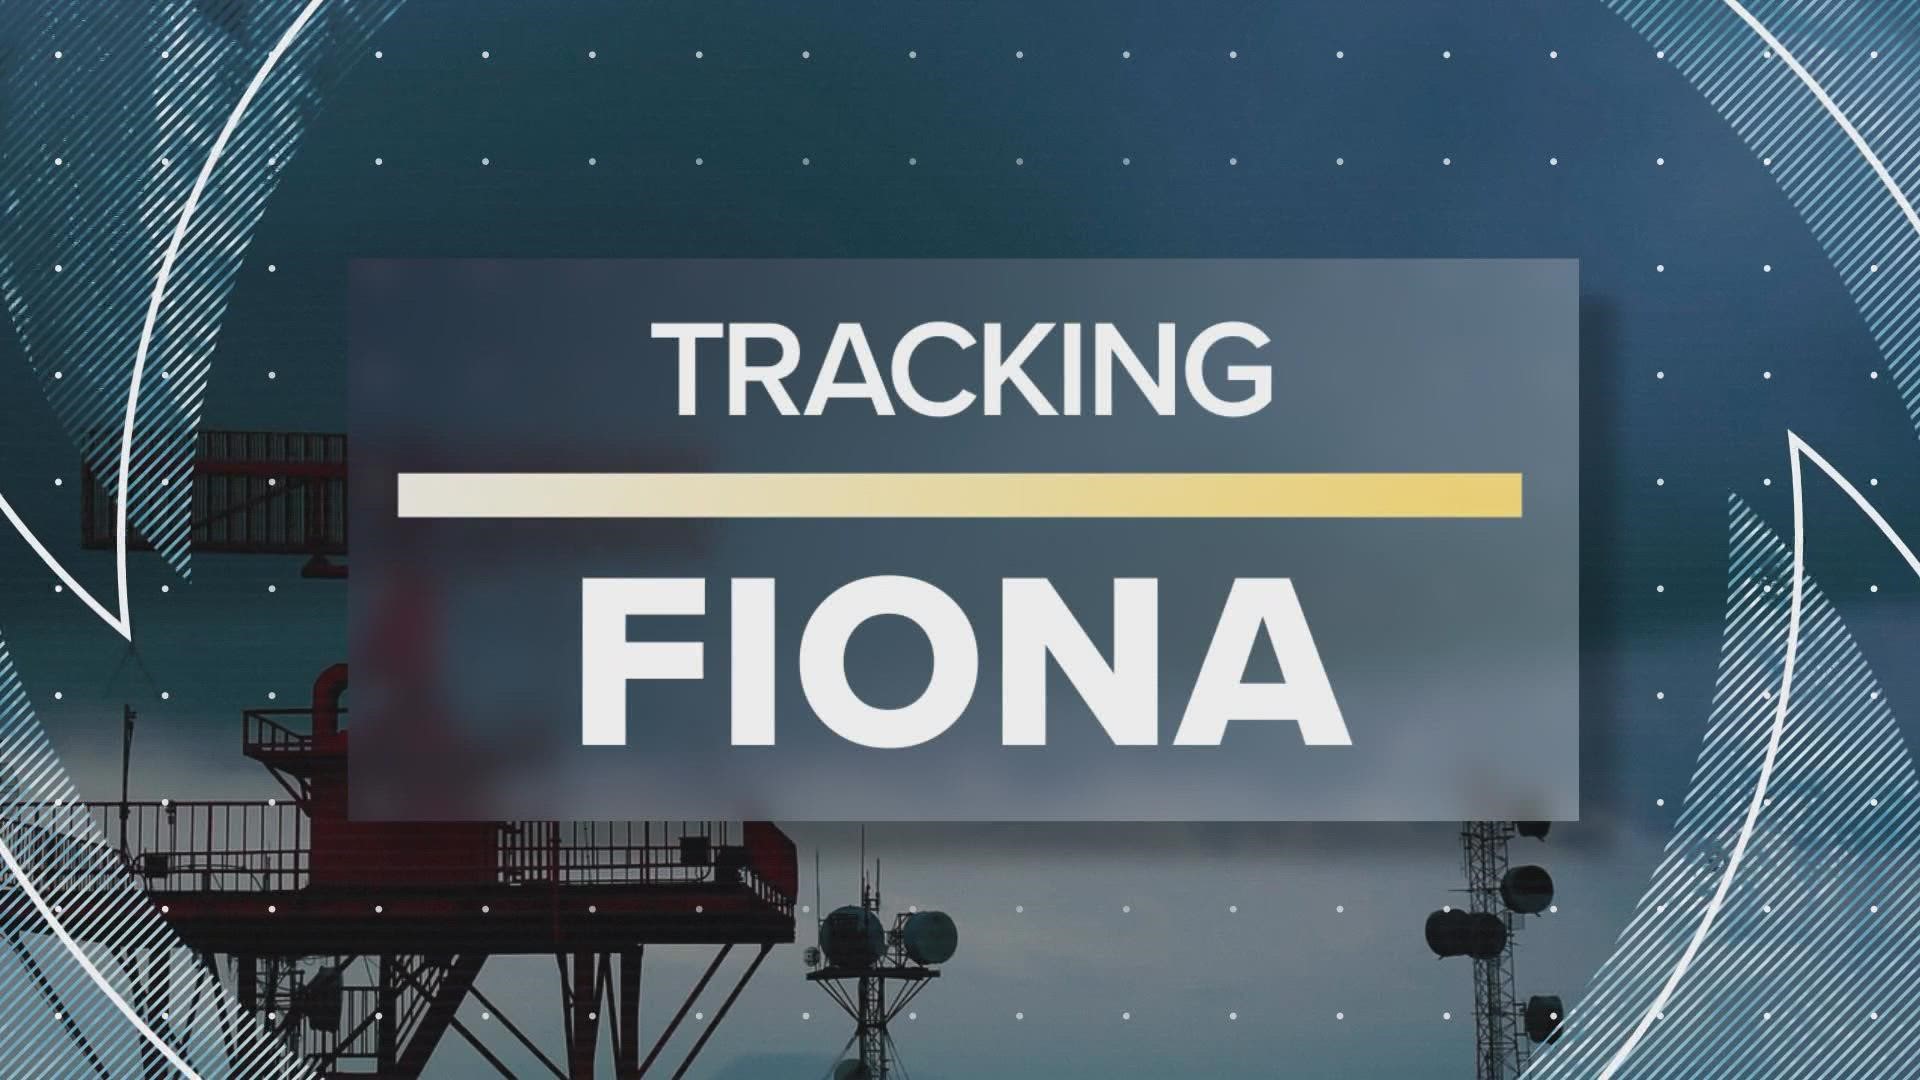 Fiona is expected to cause heavy rain and flooding Friday night before hitting the coast of Nova Scotia on Saturday morning.